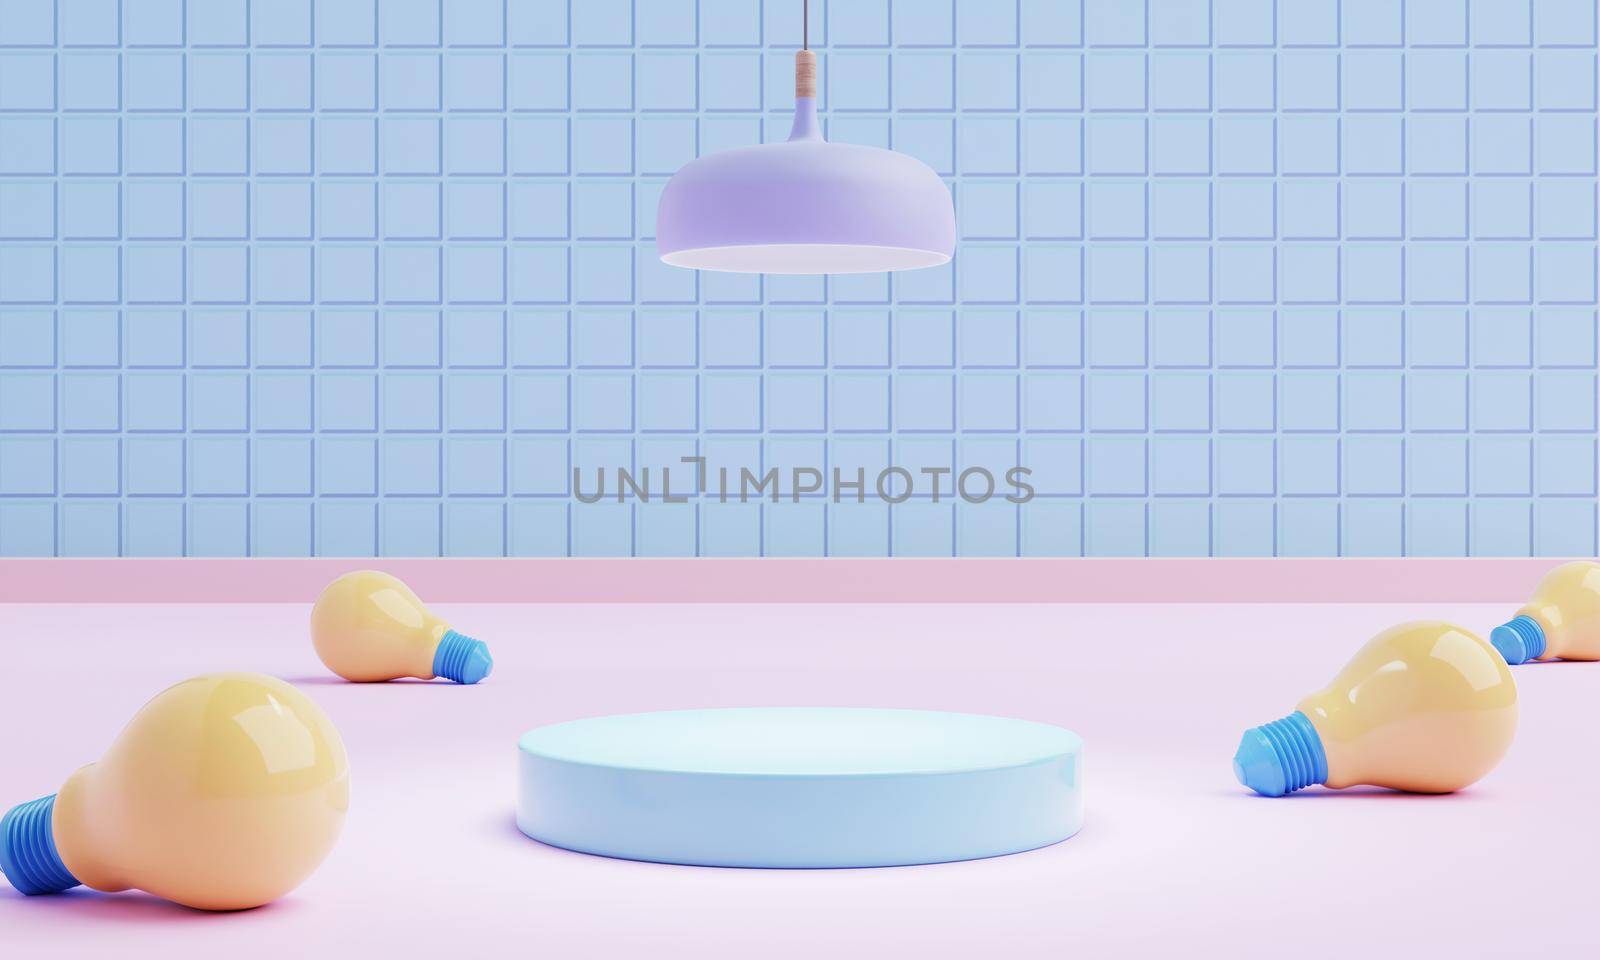 Abstract geometric shape in pastel colors with lightbulbs and lamp for product podium presentation background. Shower room and bathroom concept. Art and Color concept. 3D illustration rendering by MiniStocker